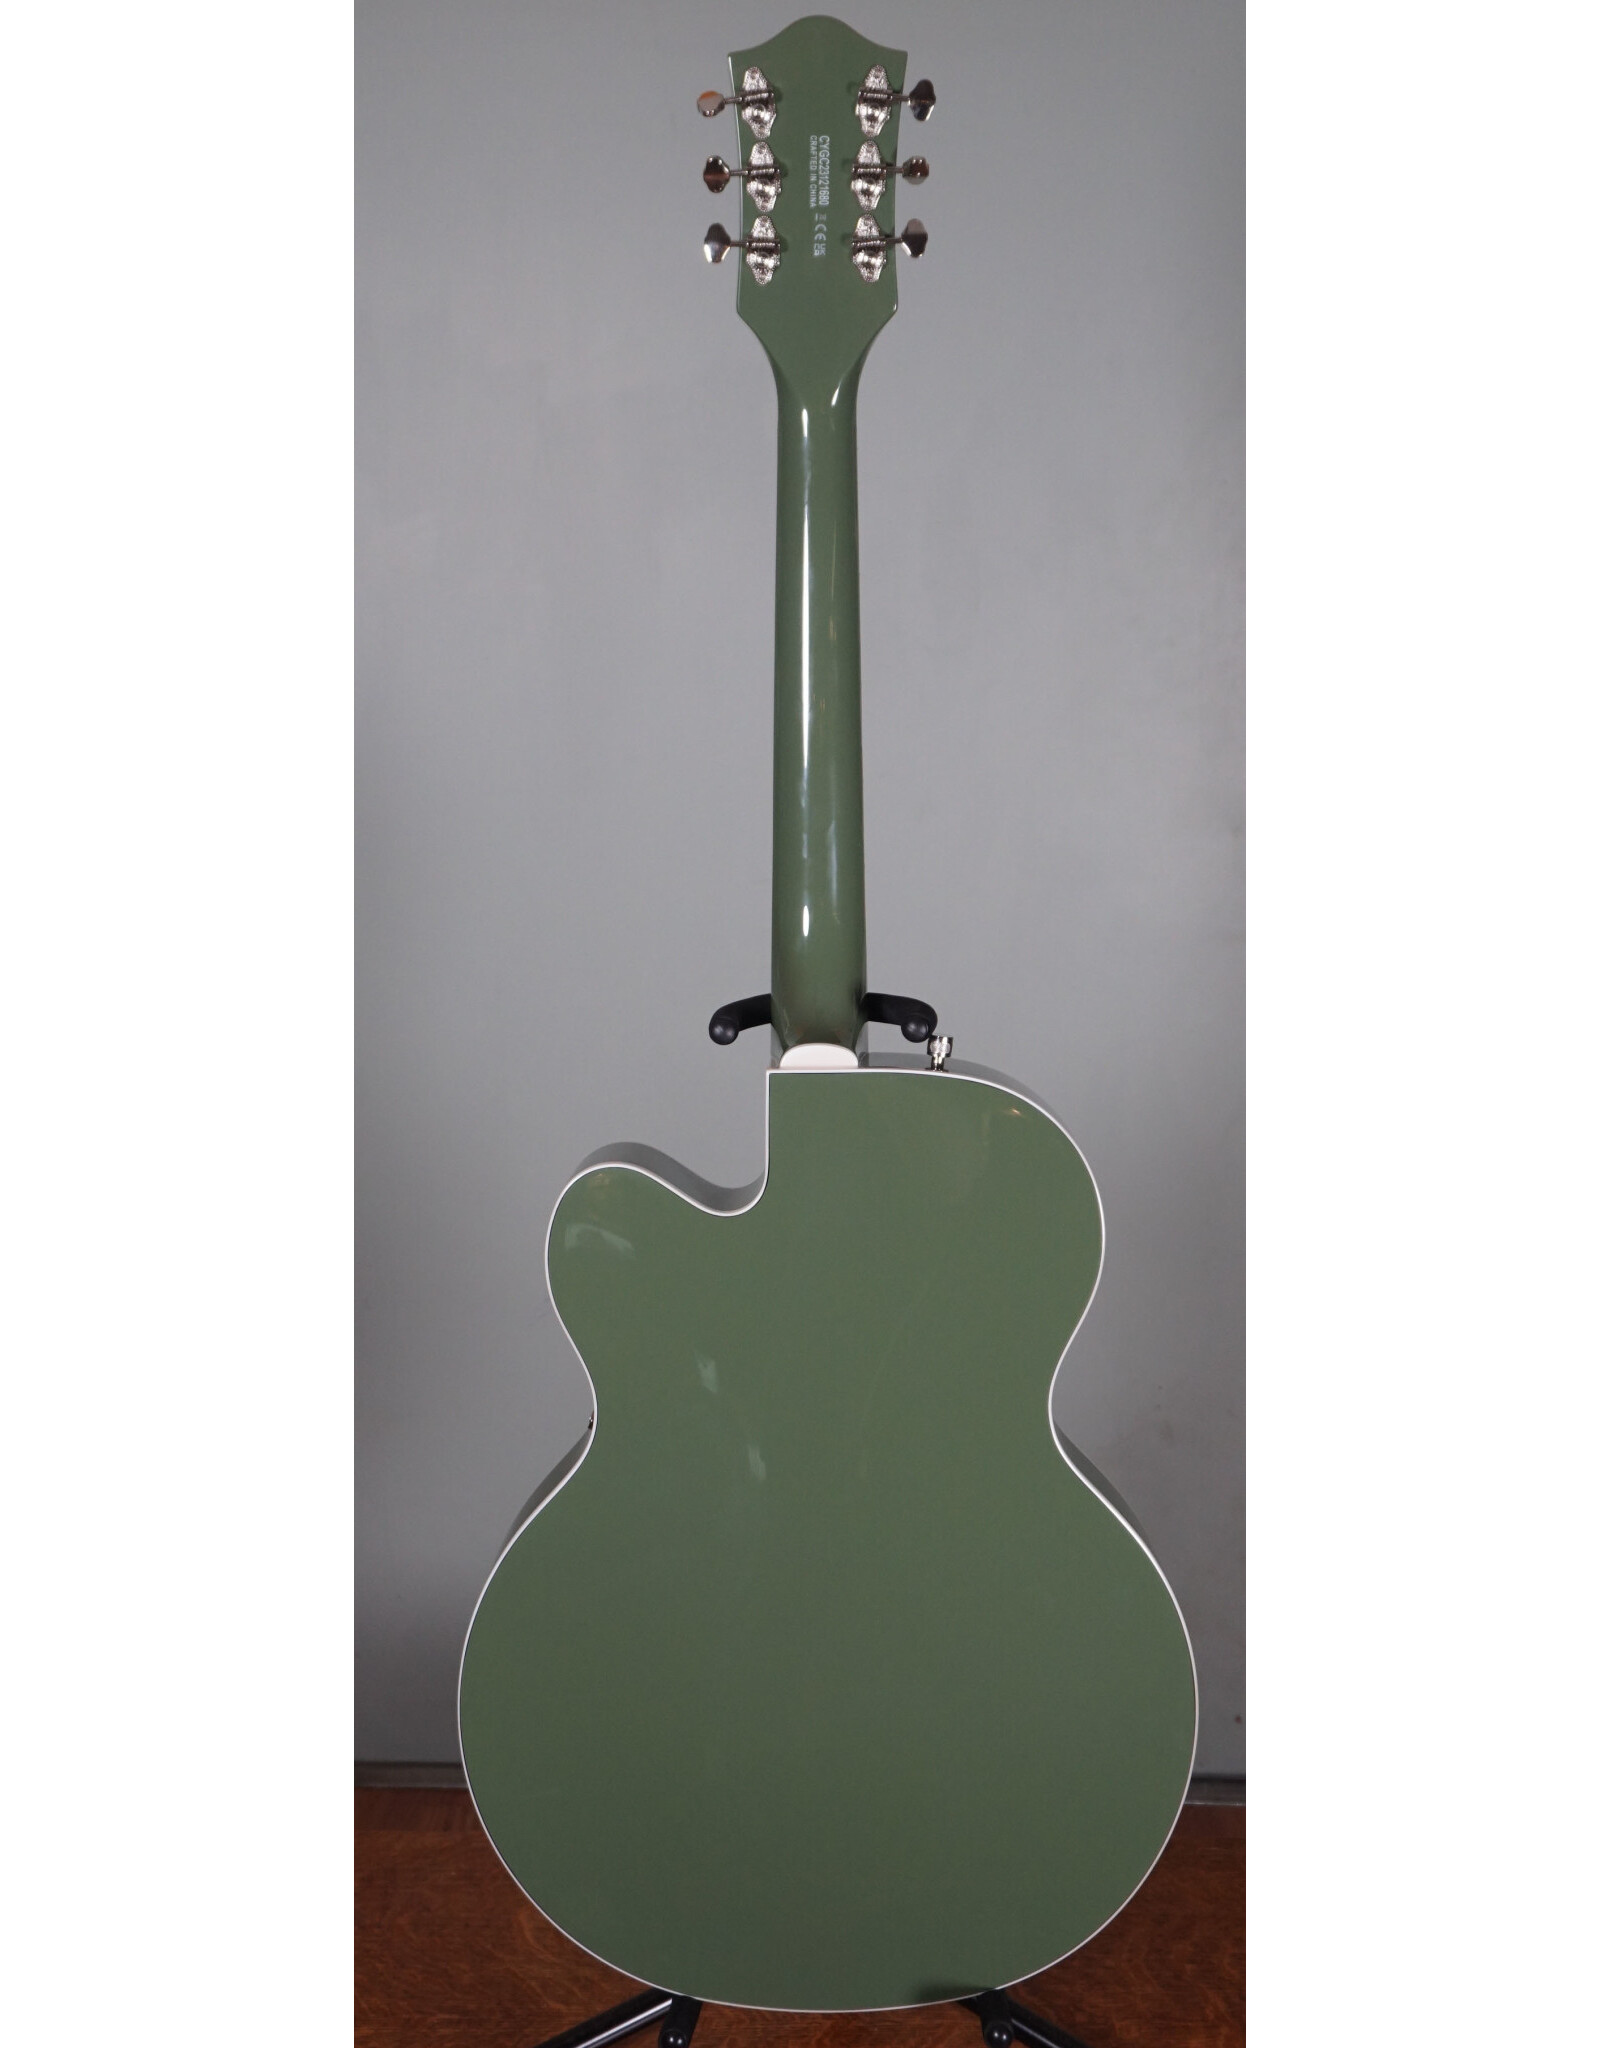 Gretsch Gretsch G5420T Electromatic Classic Hollow Body Single-Cut with Bigsby, Two-Tone Anniversary Green